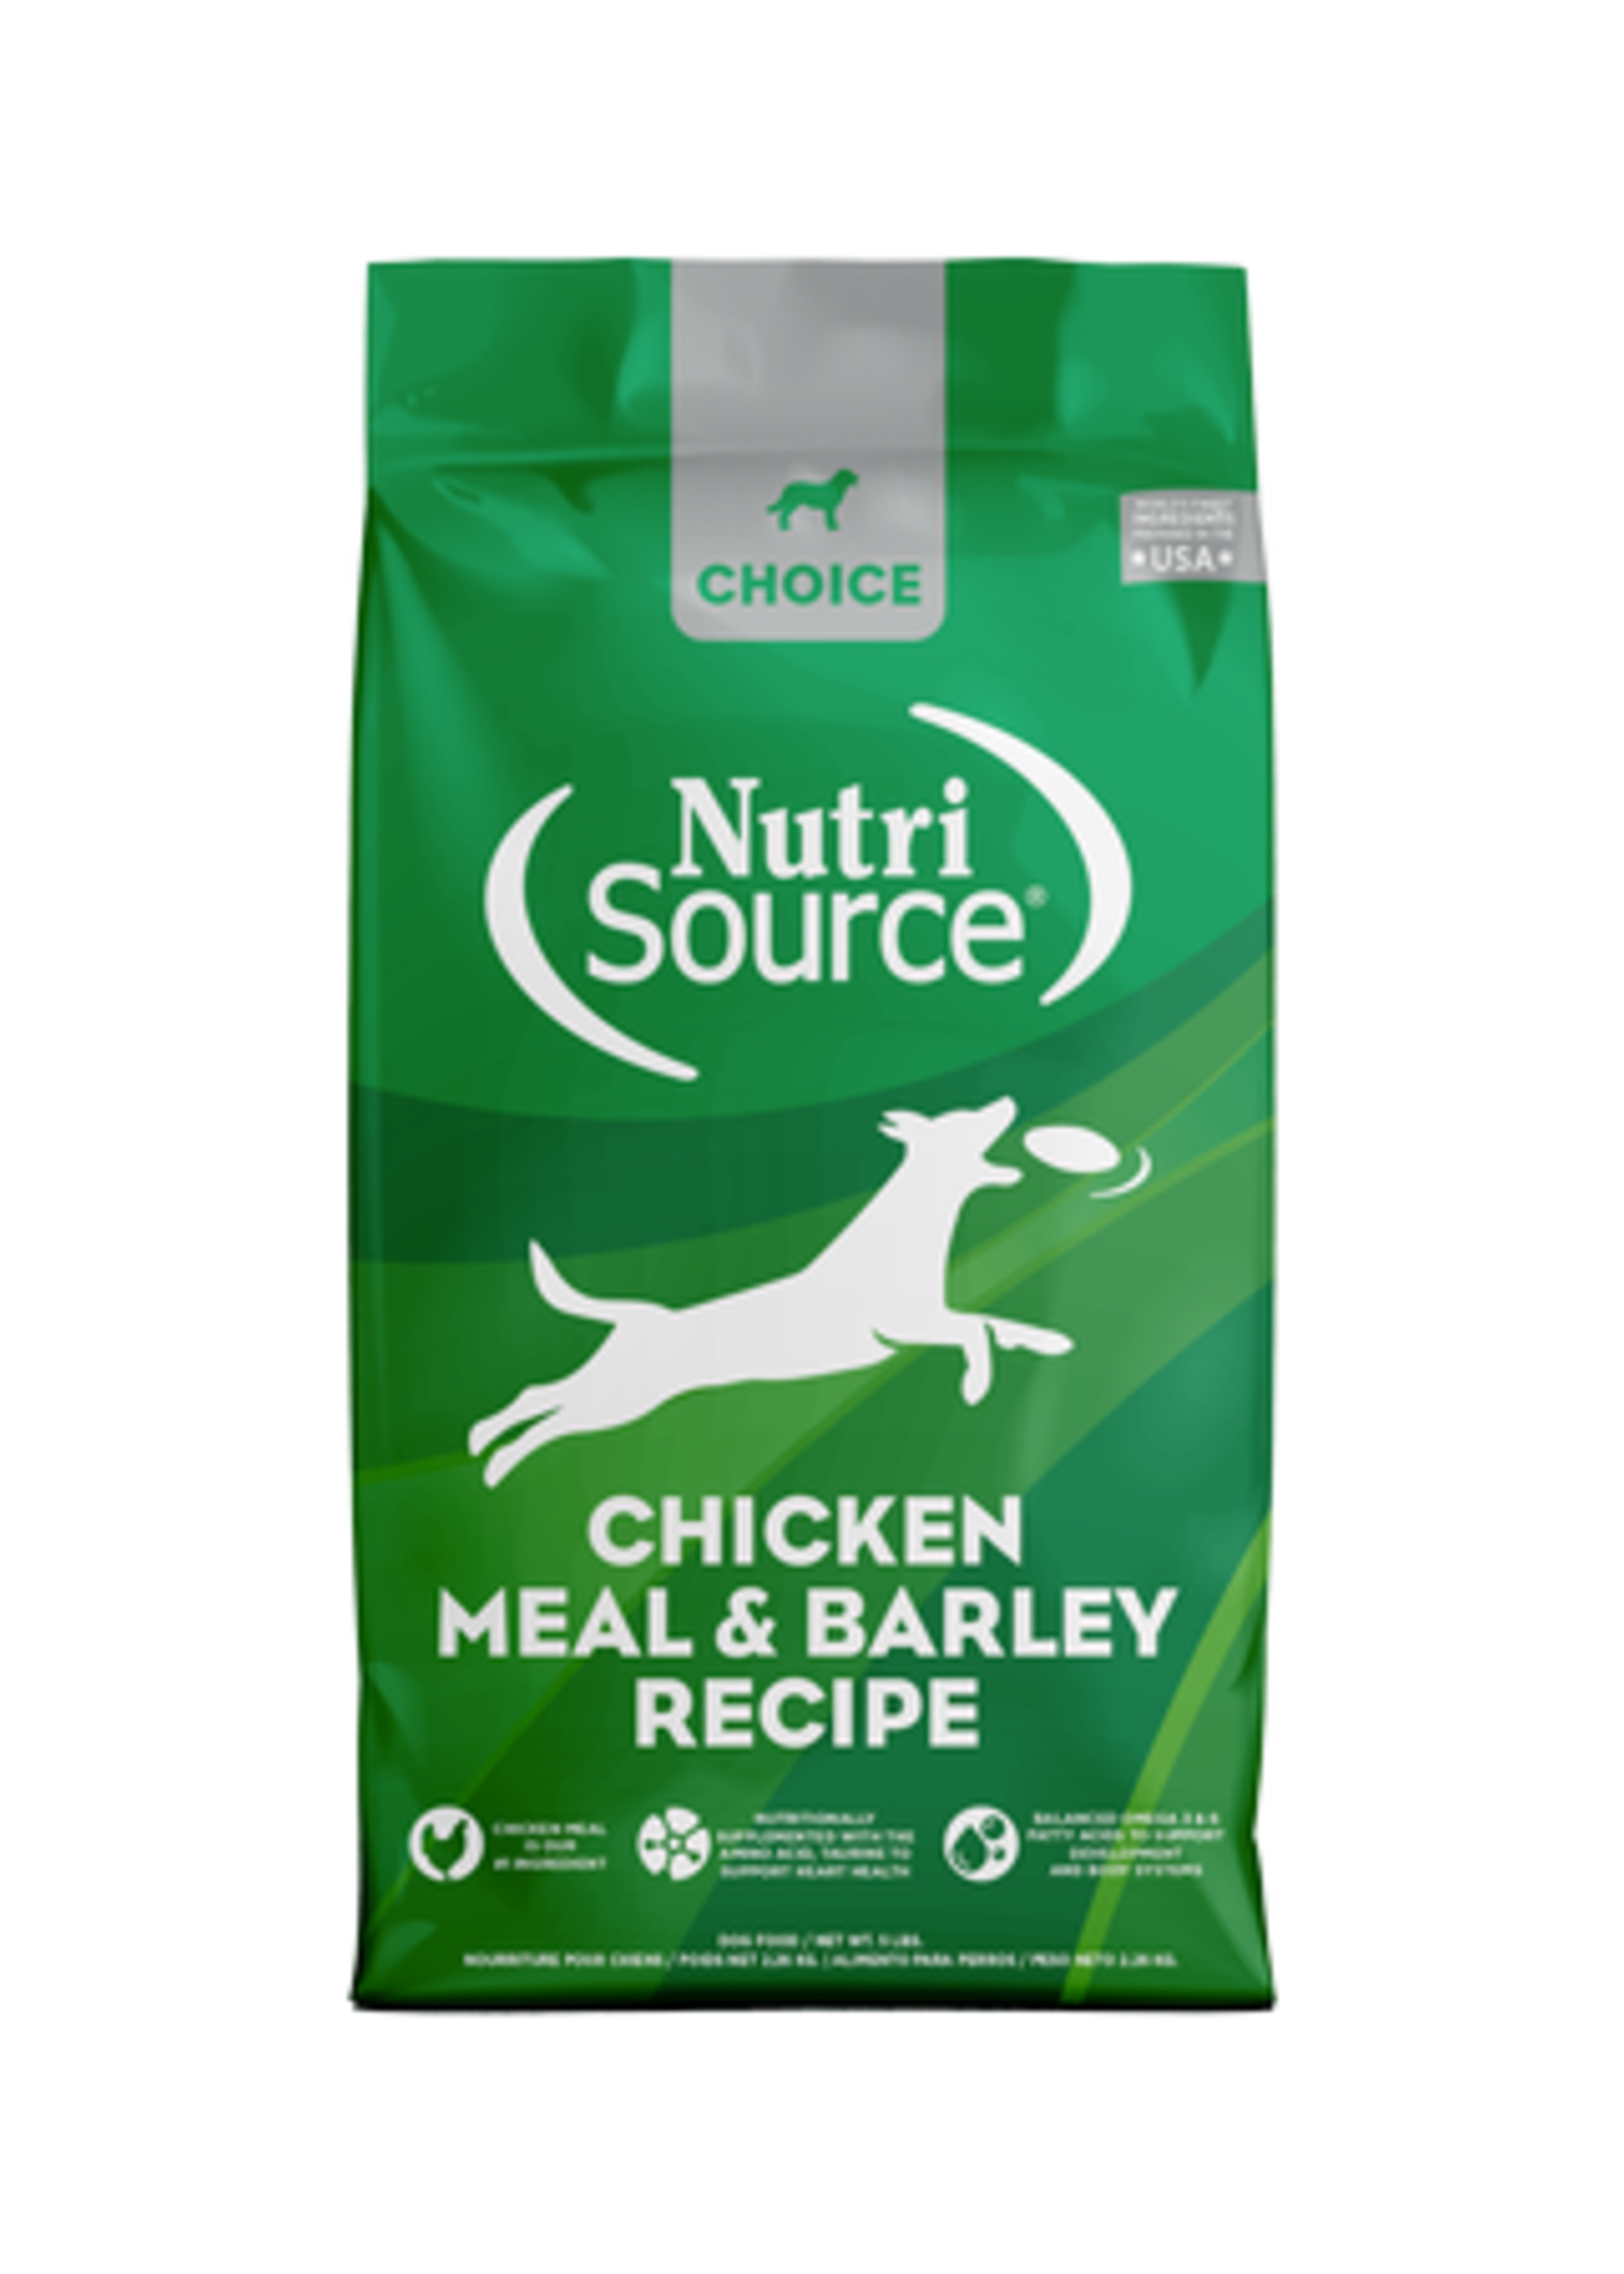 NutriSource Nutrisource Choice Dog Chicken Meal & Barley 5lbs